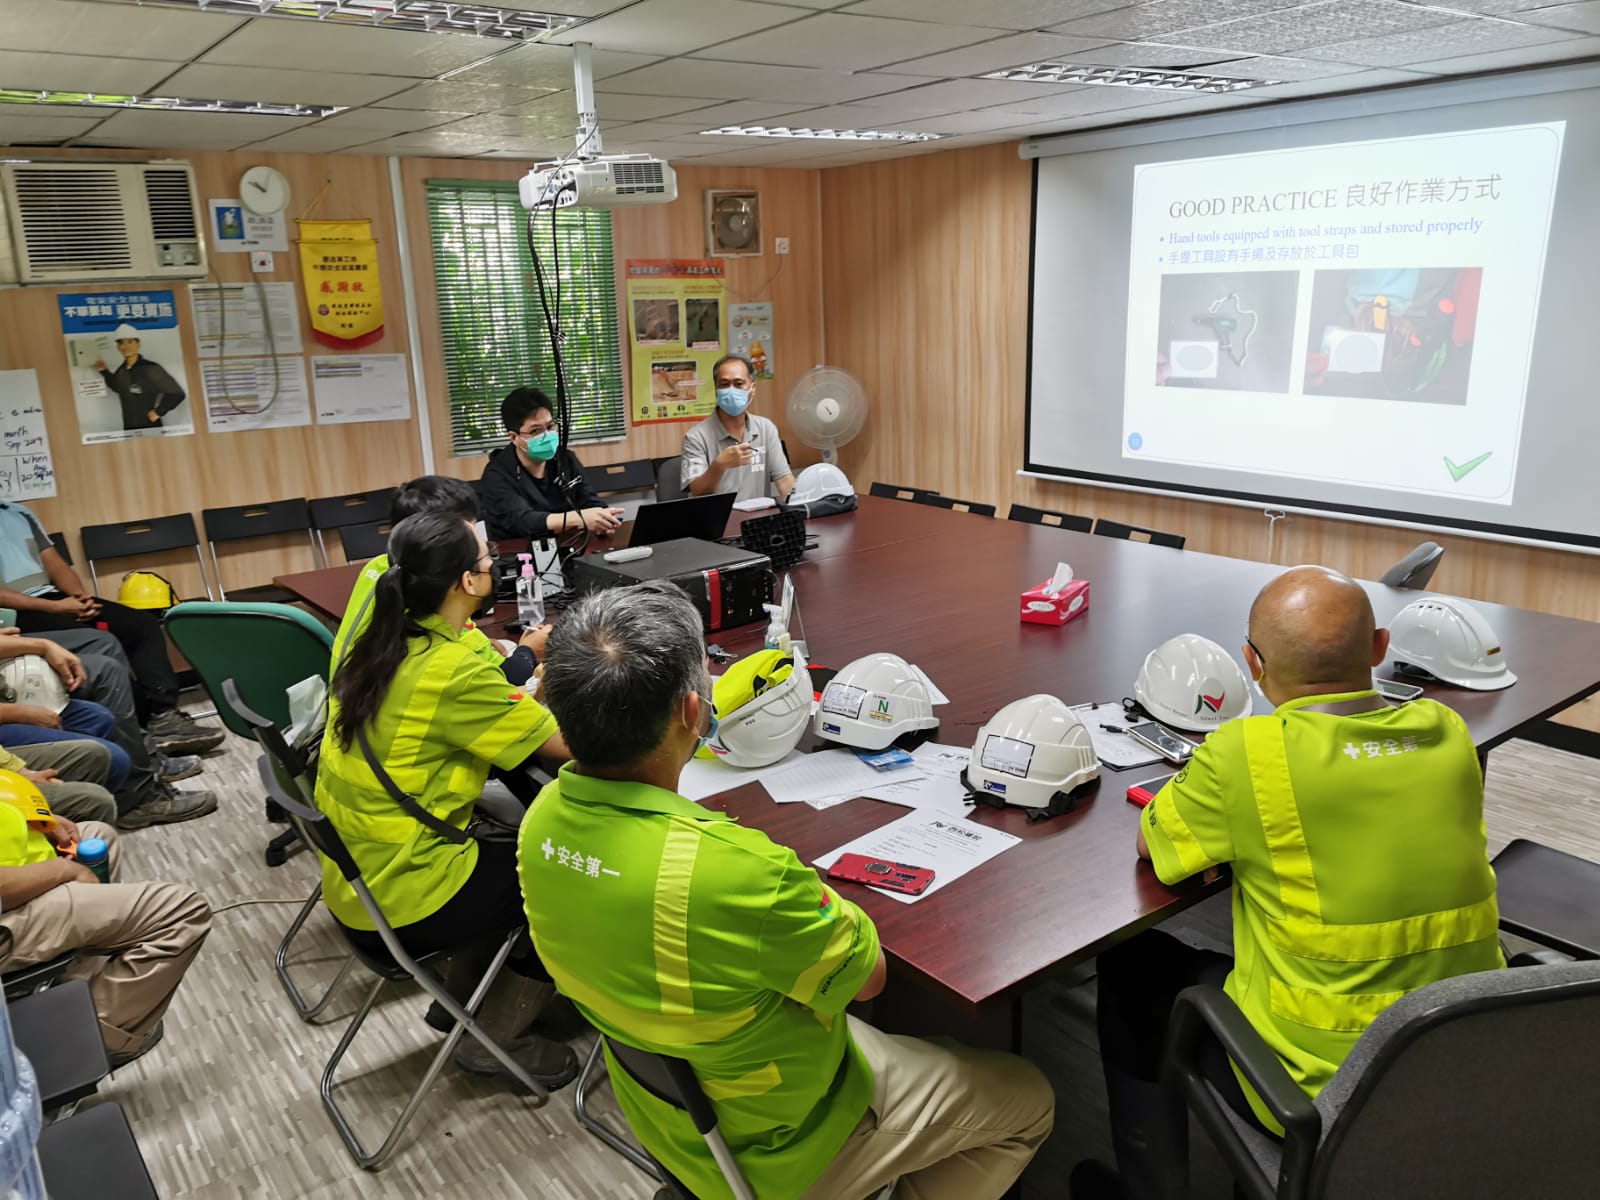 Lunchtime's Safety Talk at San Po Kong DOS on 18/6/2020